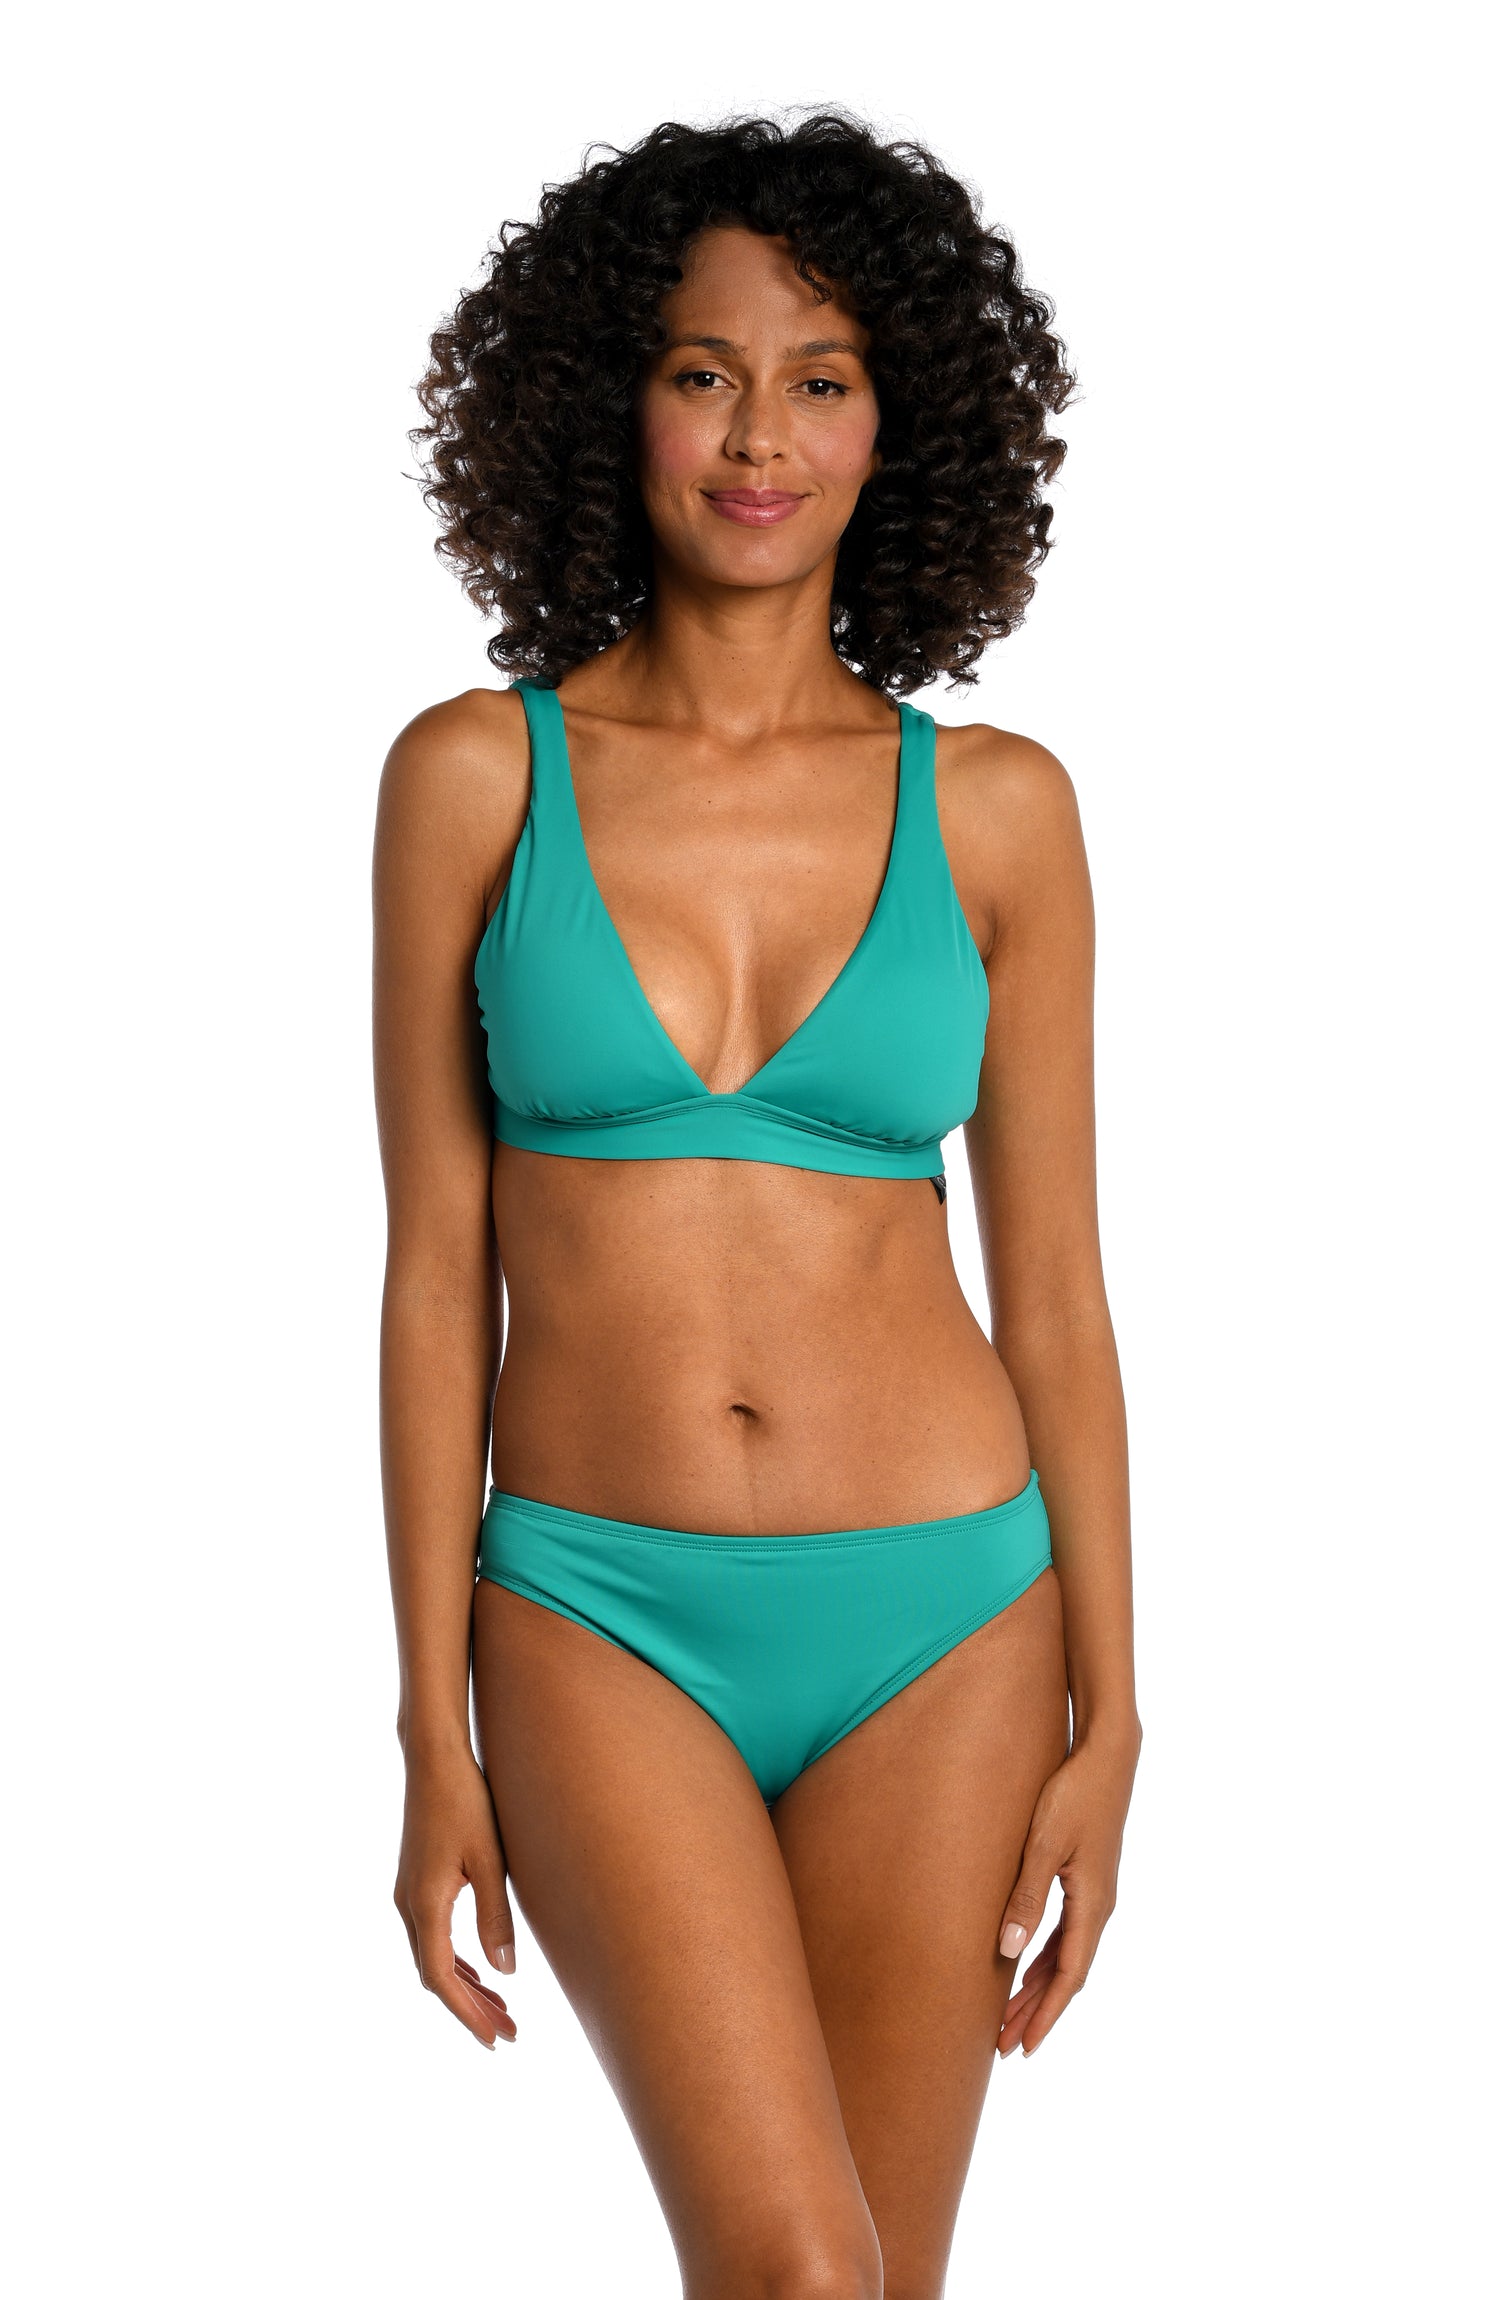 Model is wearing a emerald colored tall triangle swimsuit top from our Best-Selling Island Goddess collection.